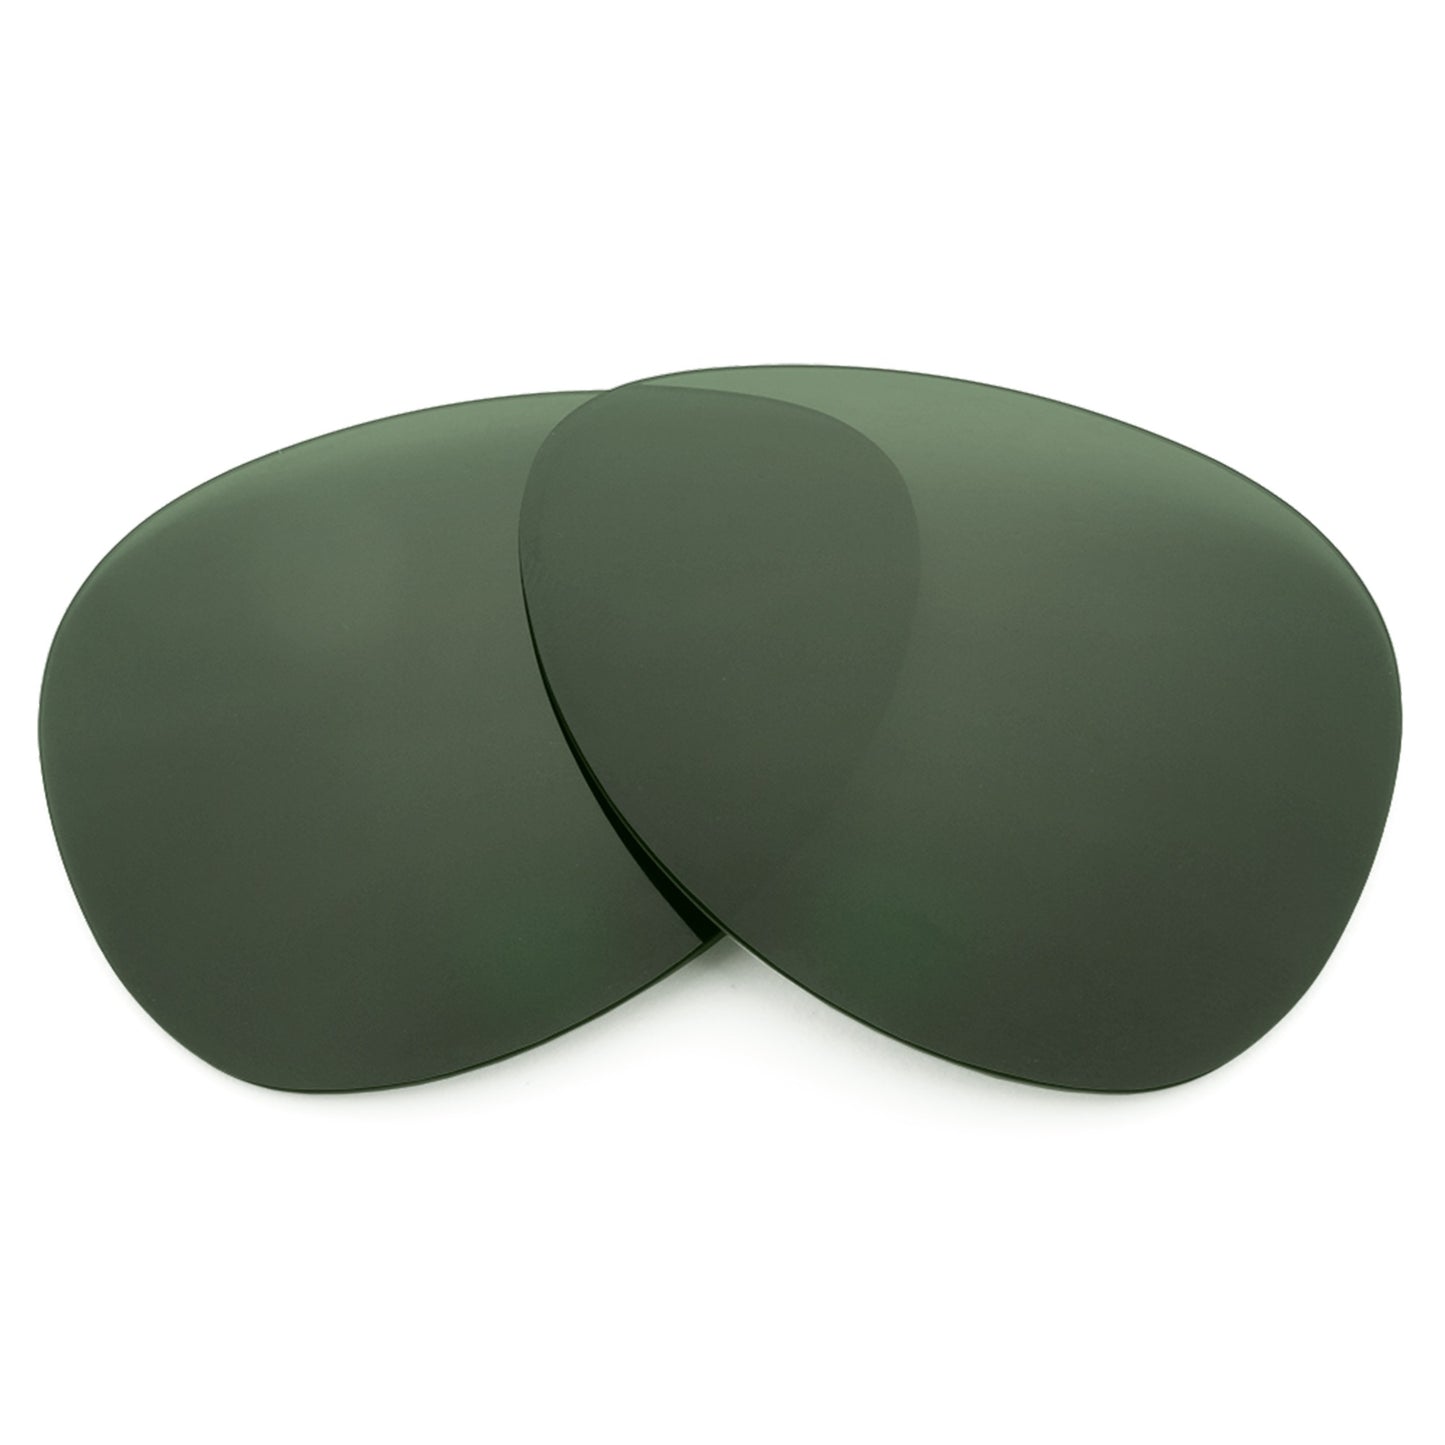 Revant replacement lenses for Ray-Ban Aviator RB3025 58mm Elite Polarized Gray Green